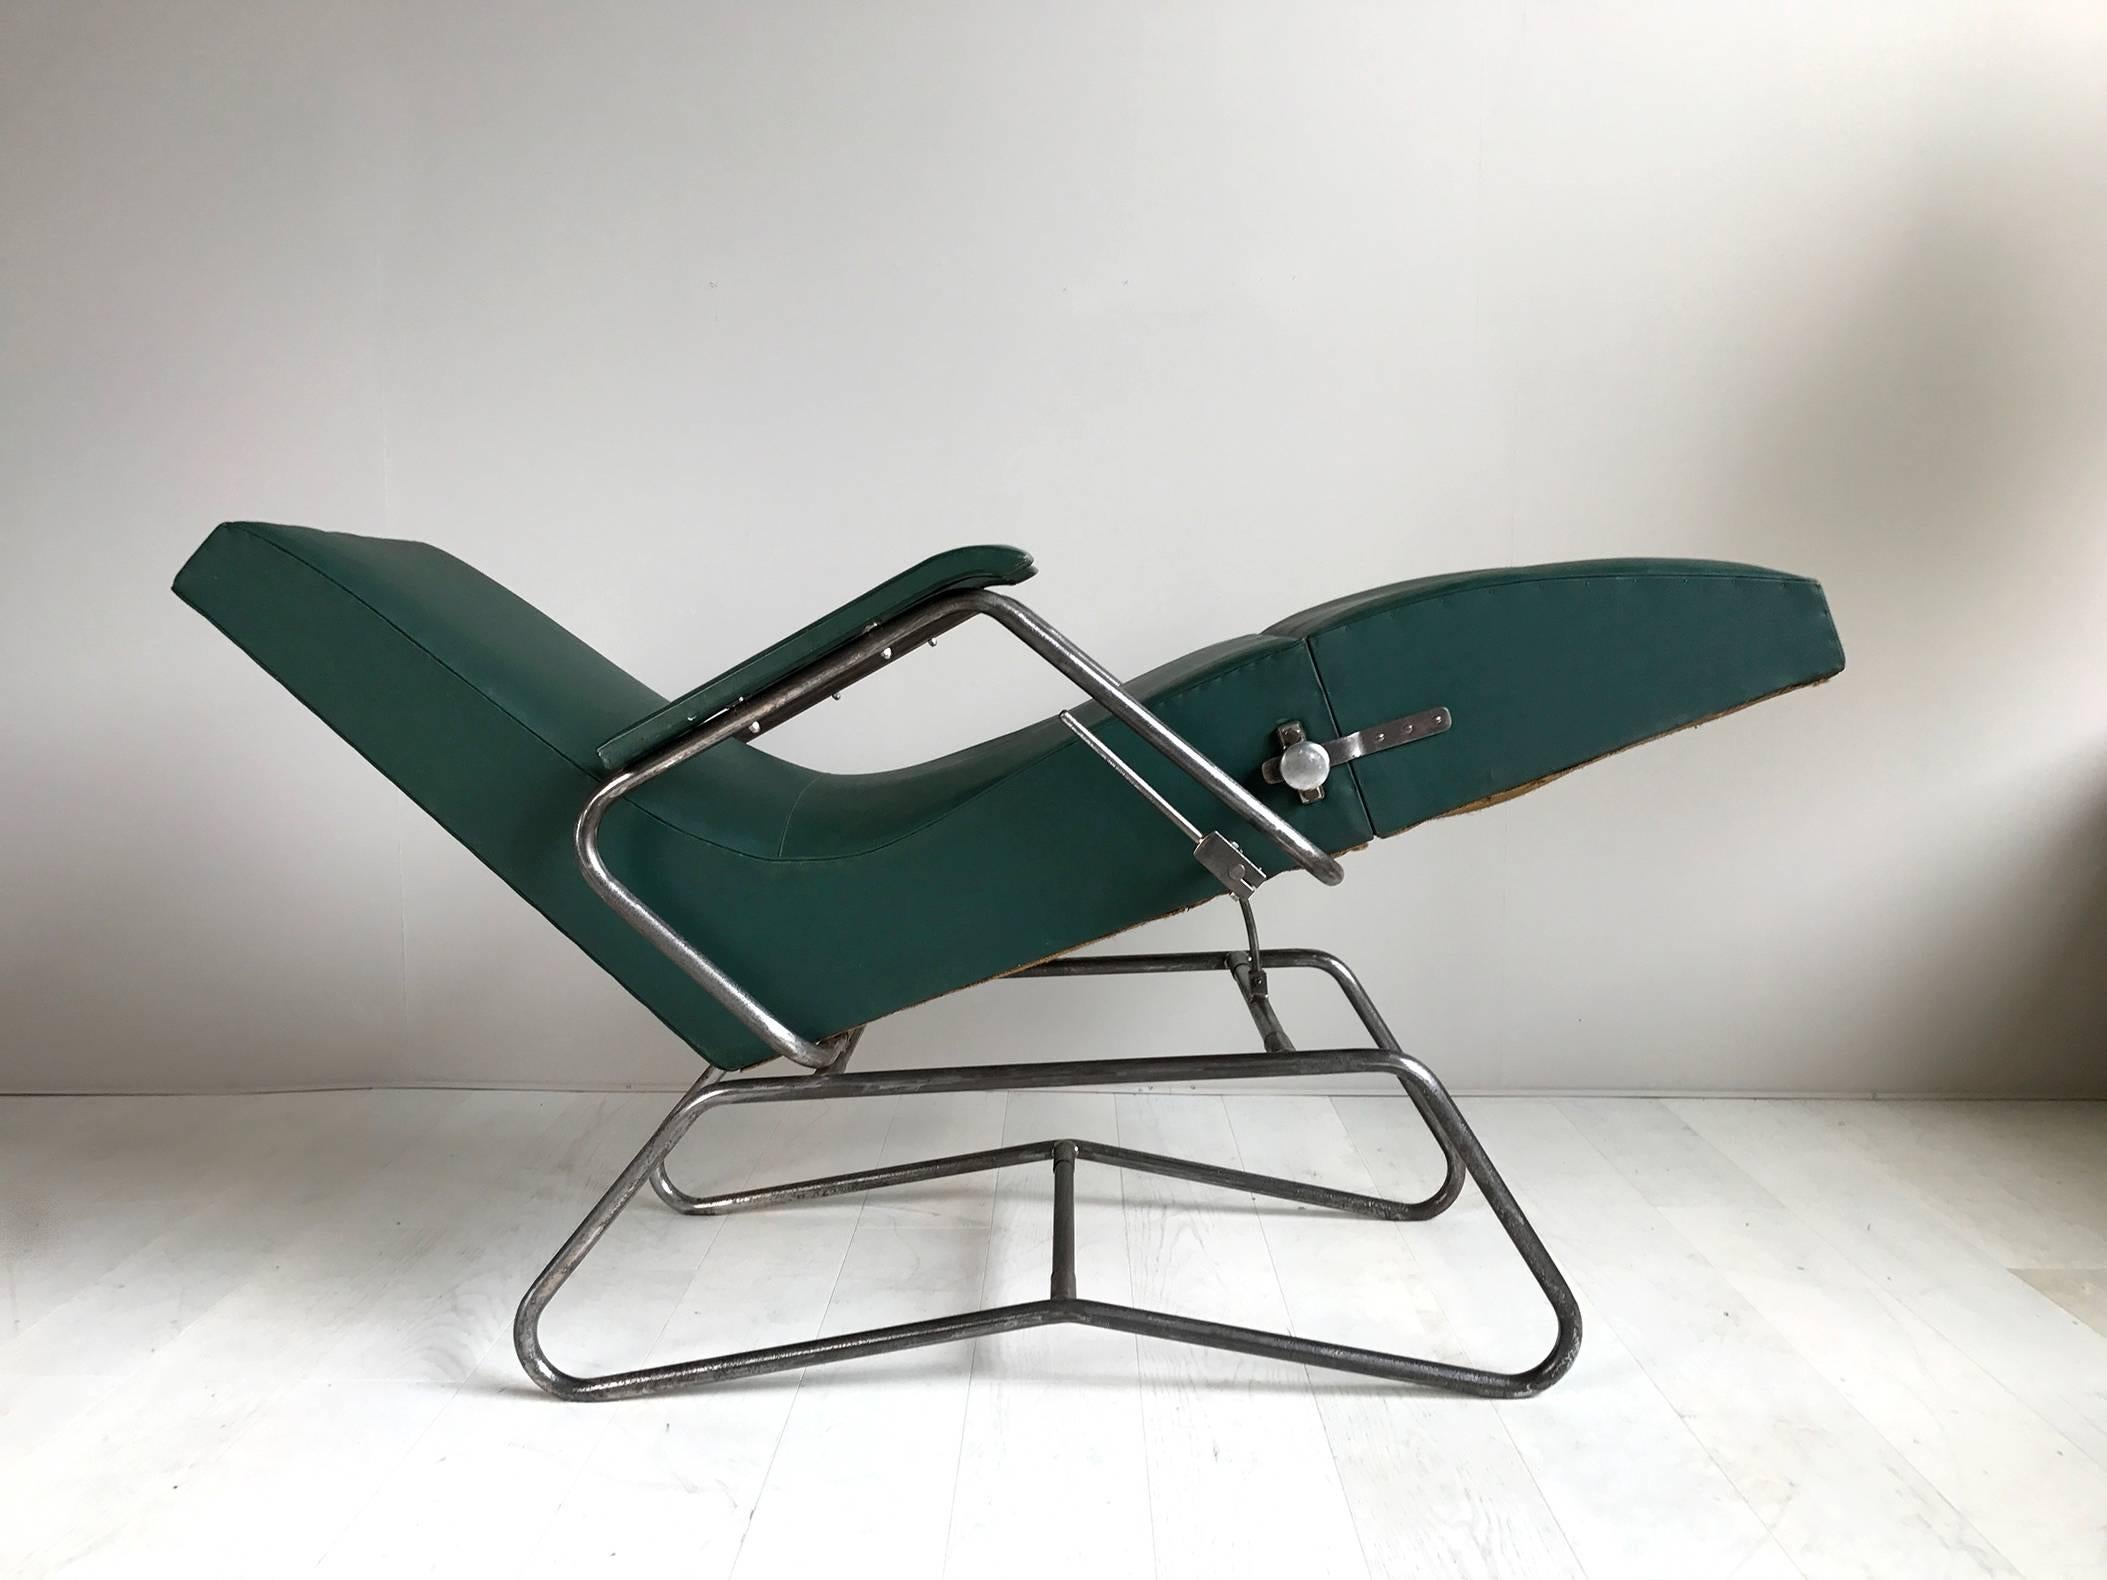 Metal Lounge Chair with System, Dupré-Perrin / Maurice Barret, France, 1930